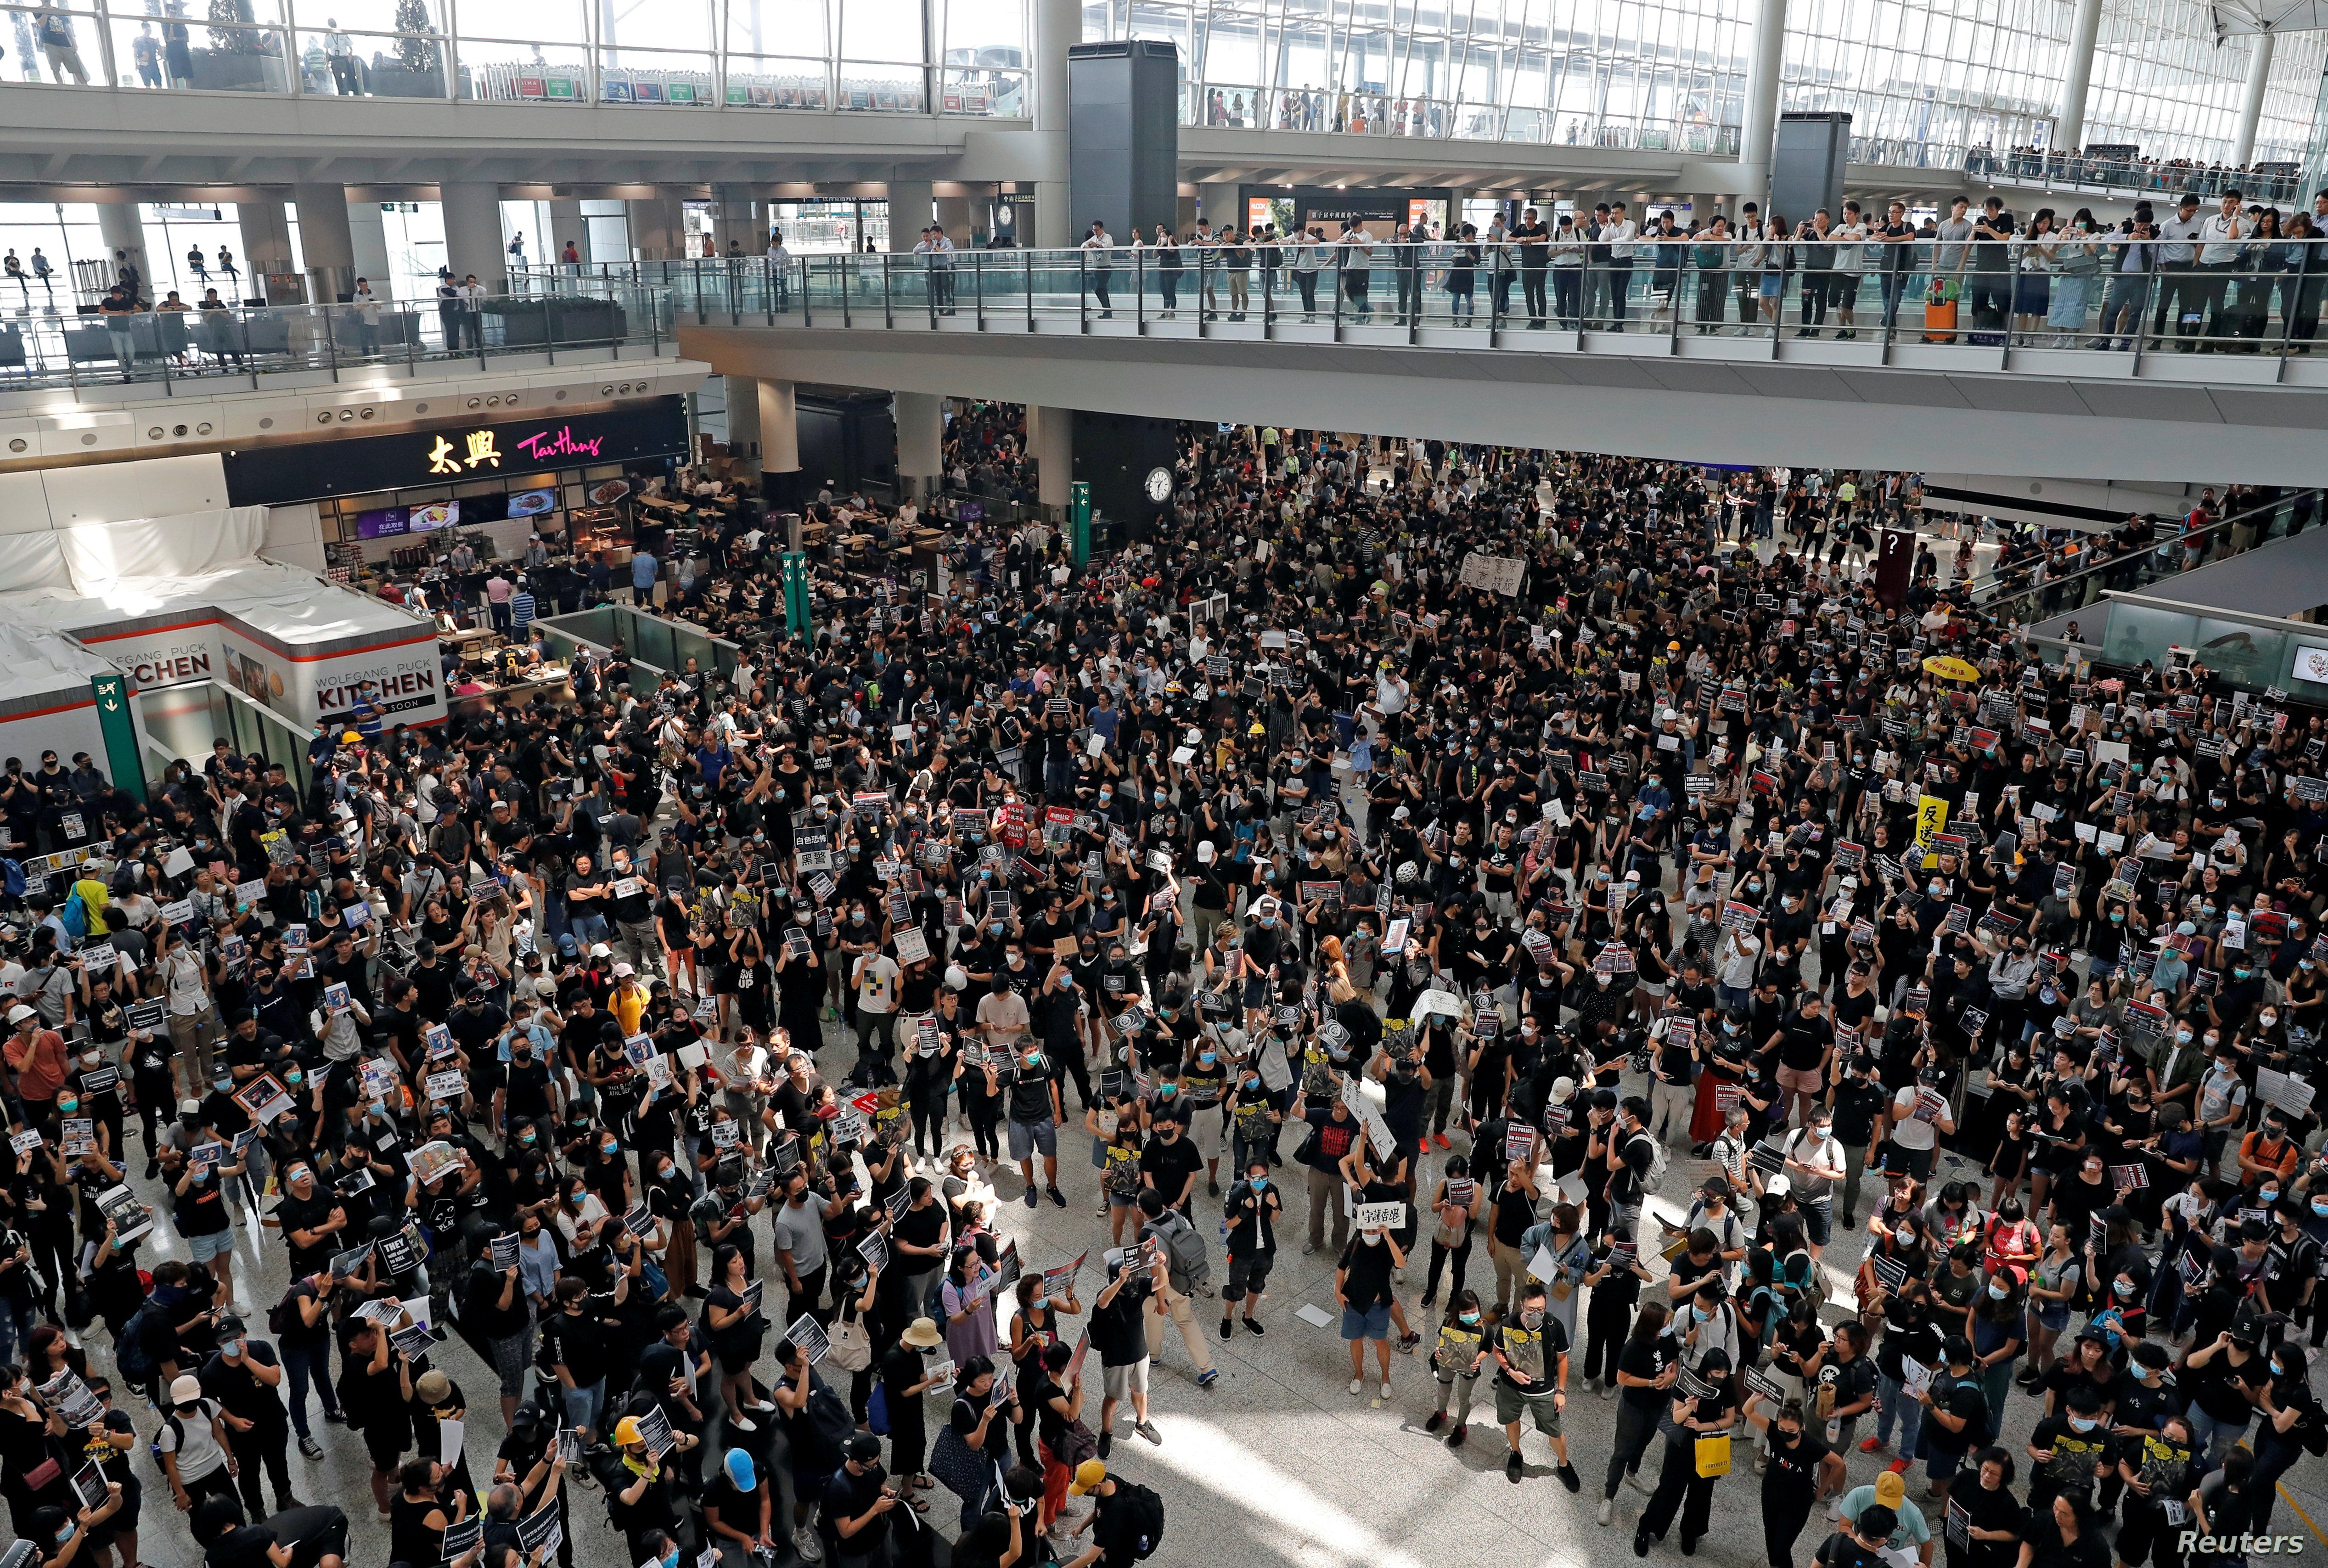 Anti-extradition bill protesters attend a mass demonstration at Hong Kong International Airport, Aug. 12, 2019.